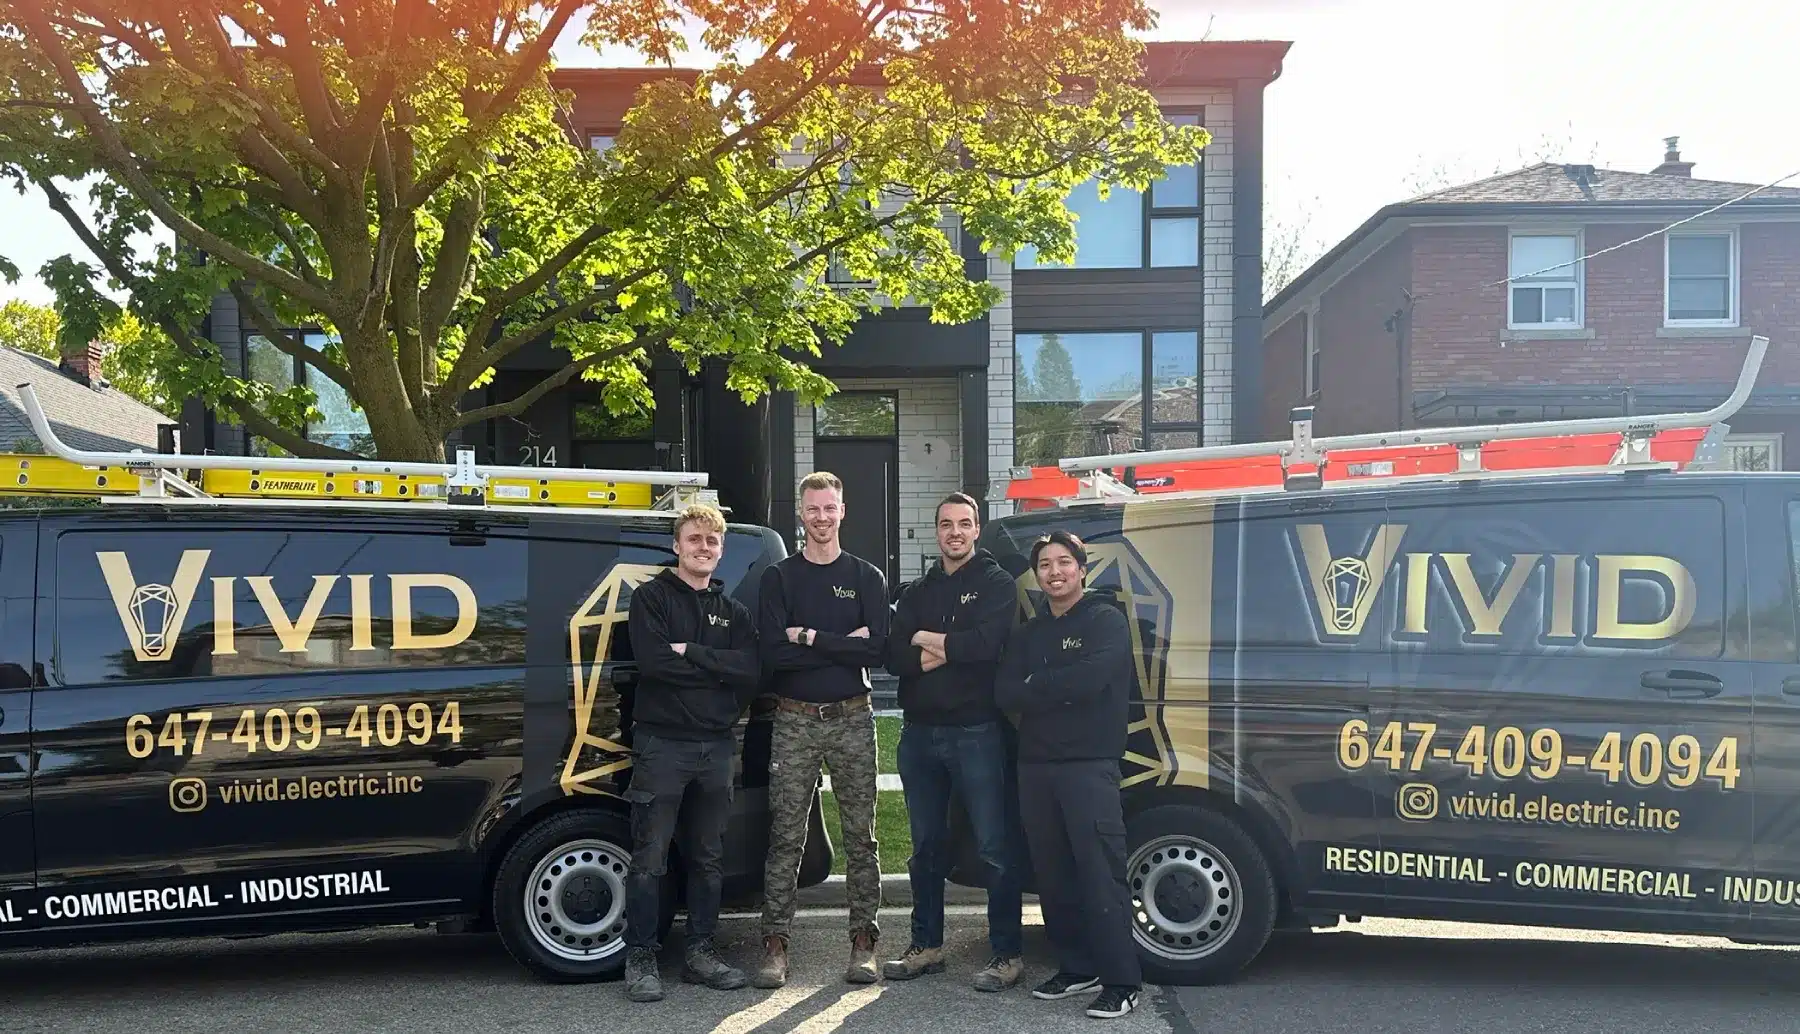 Vivid Electric Team - Vehicle Wraps and Custom Branded Apparel by Branding Centres